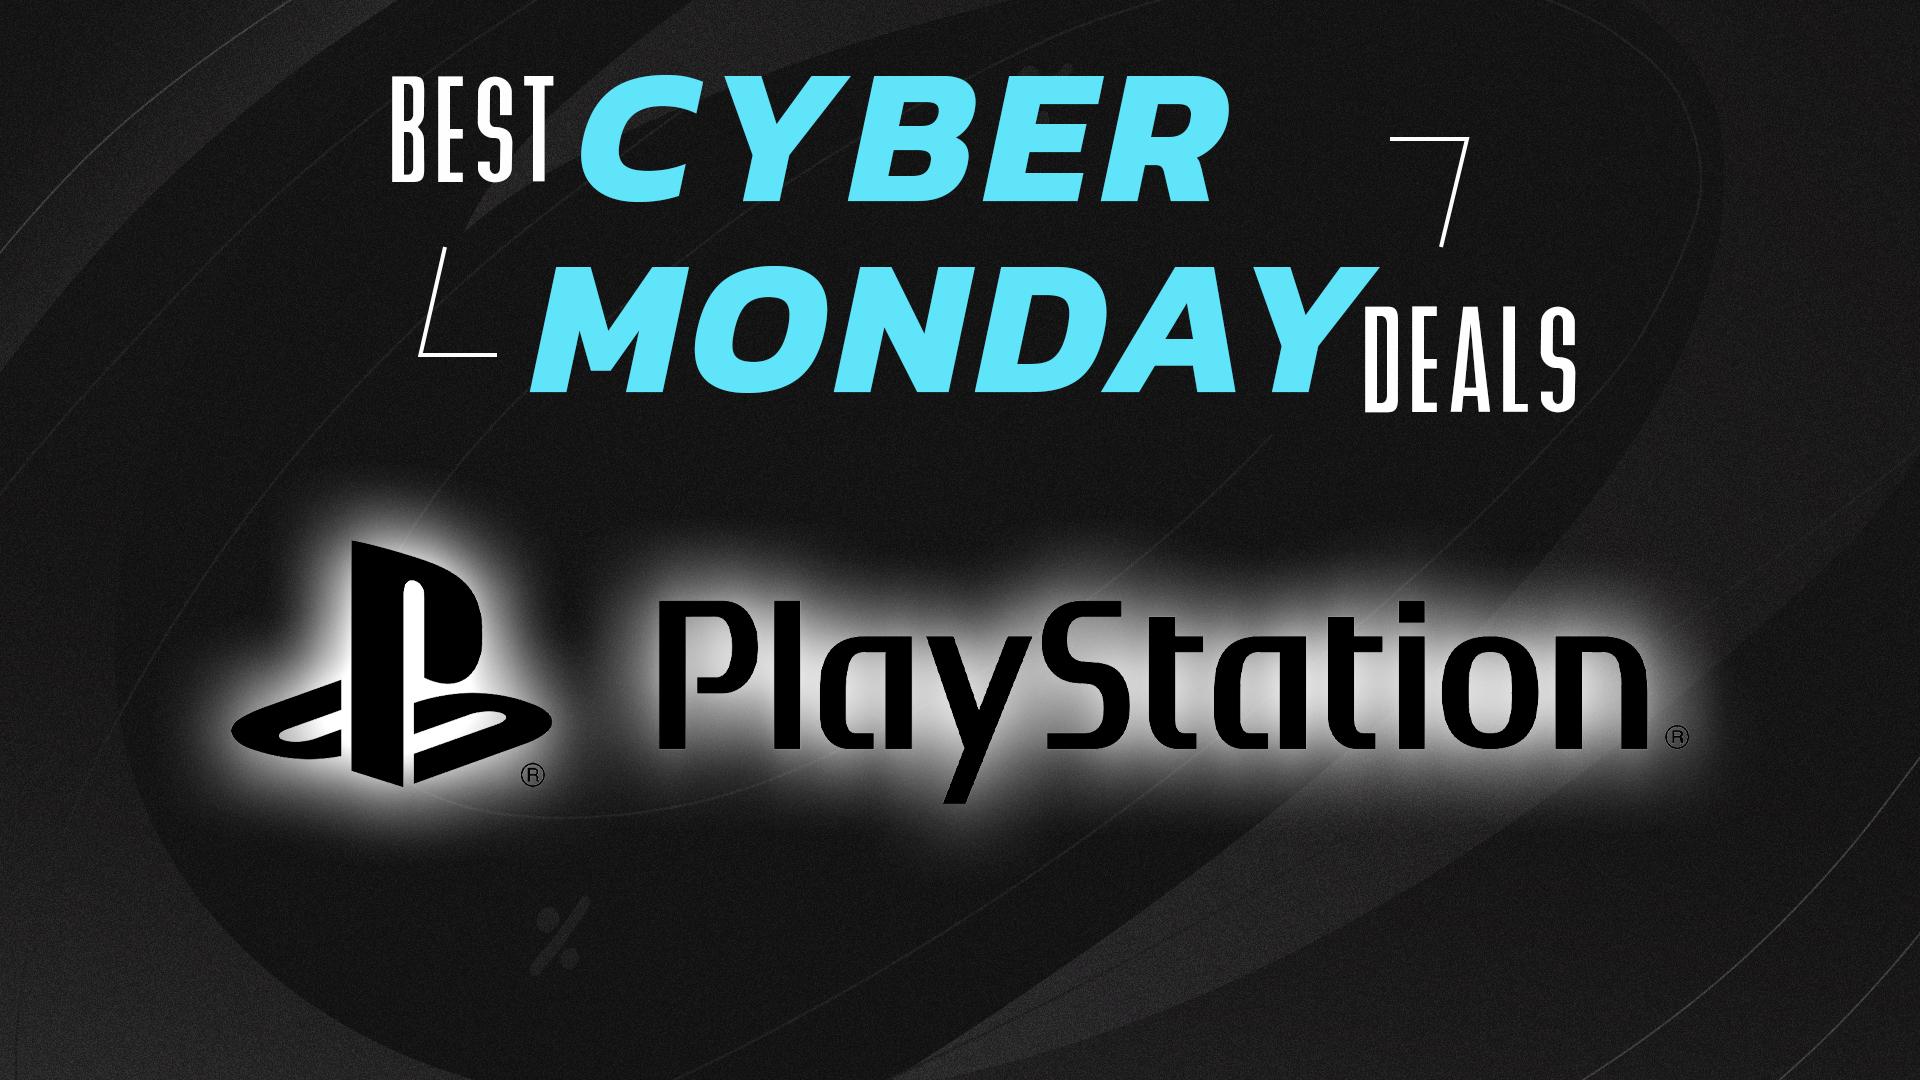 Sony Offering Discounts and Extensions to Make Up for PSN Downtime